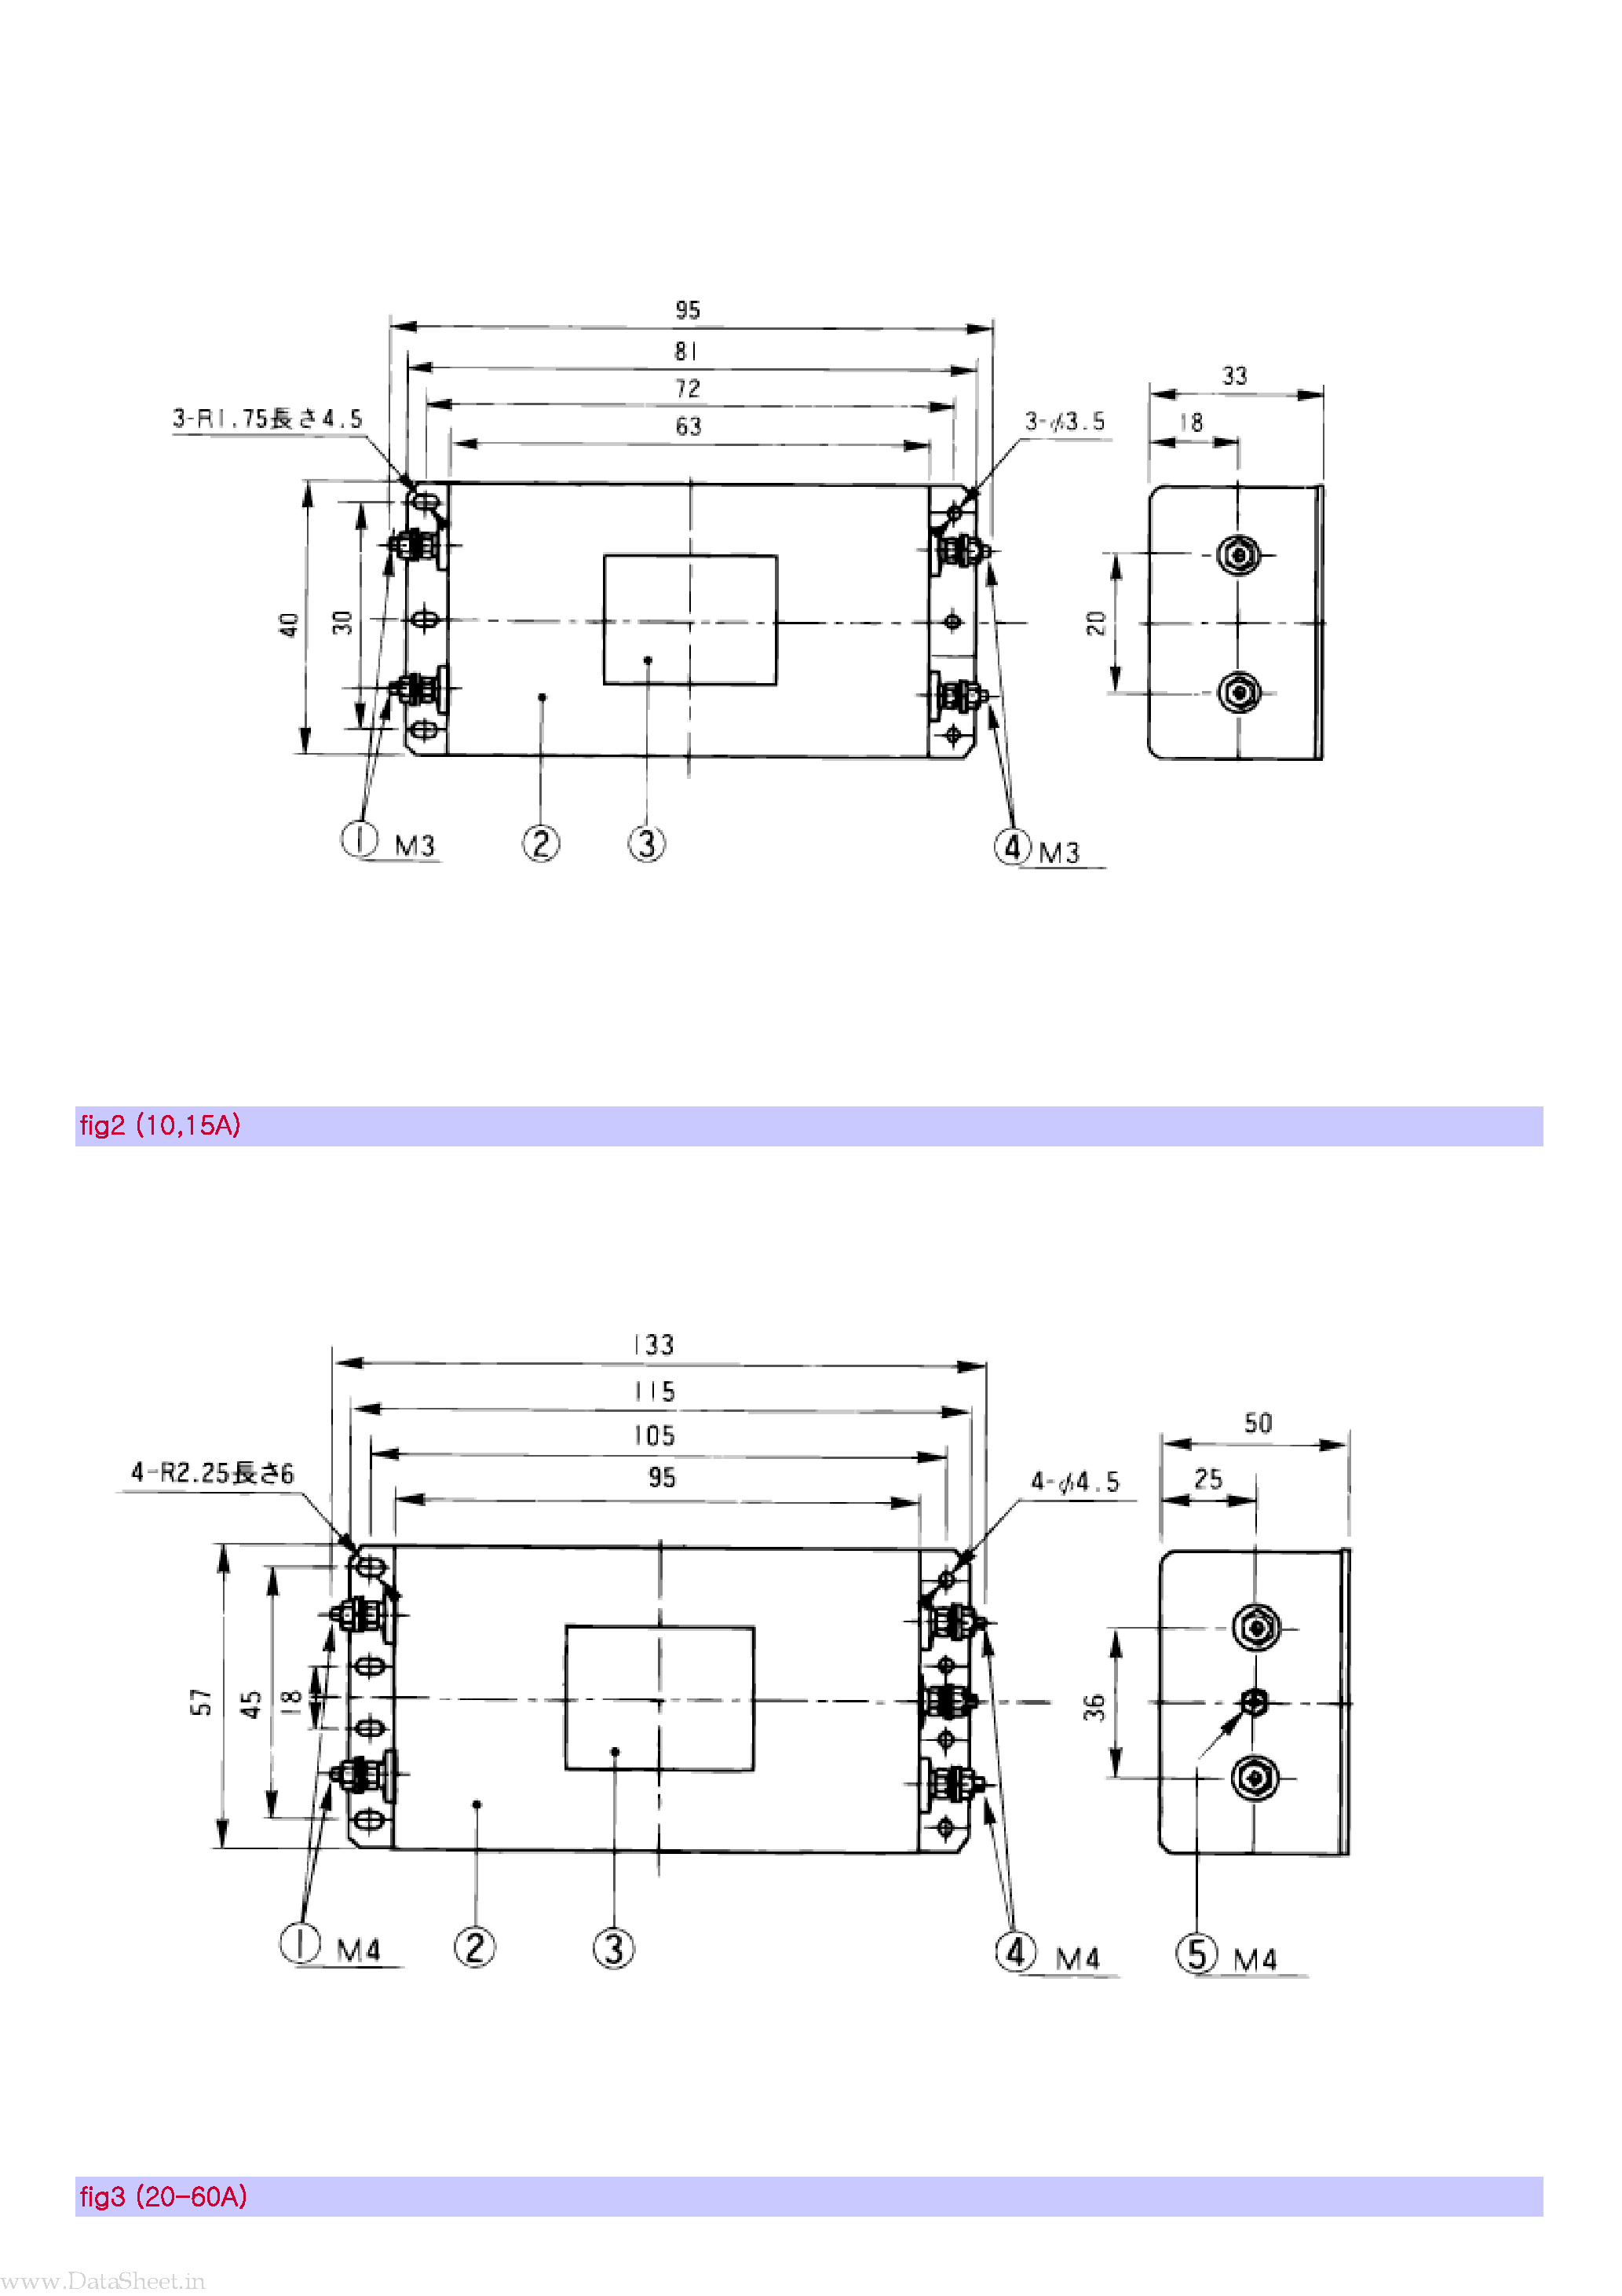 Datasheet LF2000A-NH - 5 up to 100A/High attenuation page 2